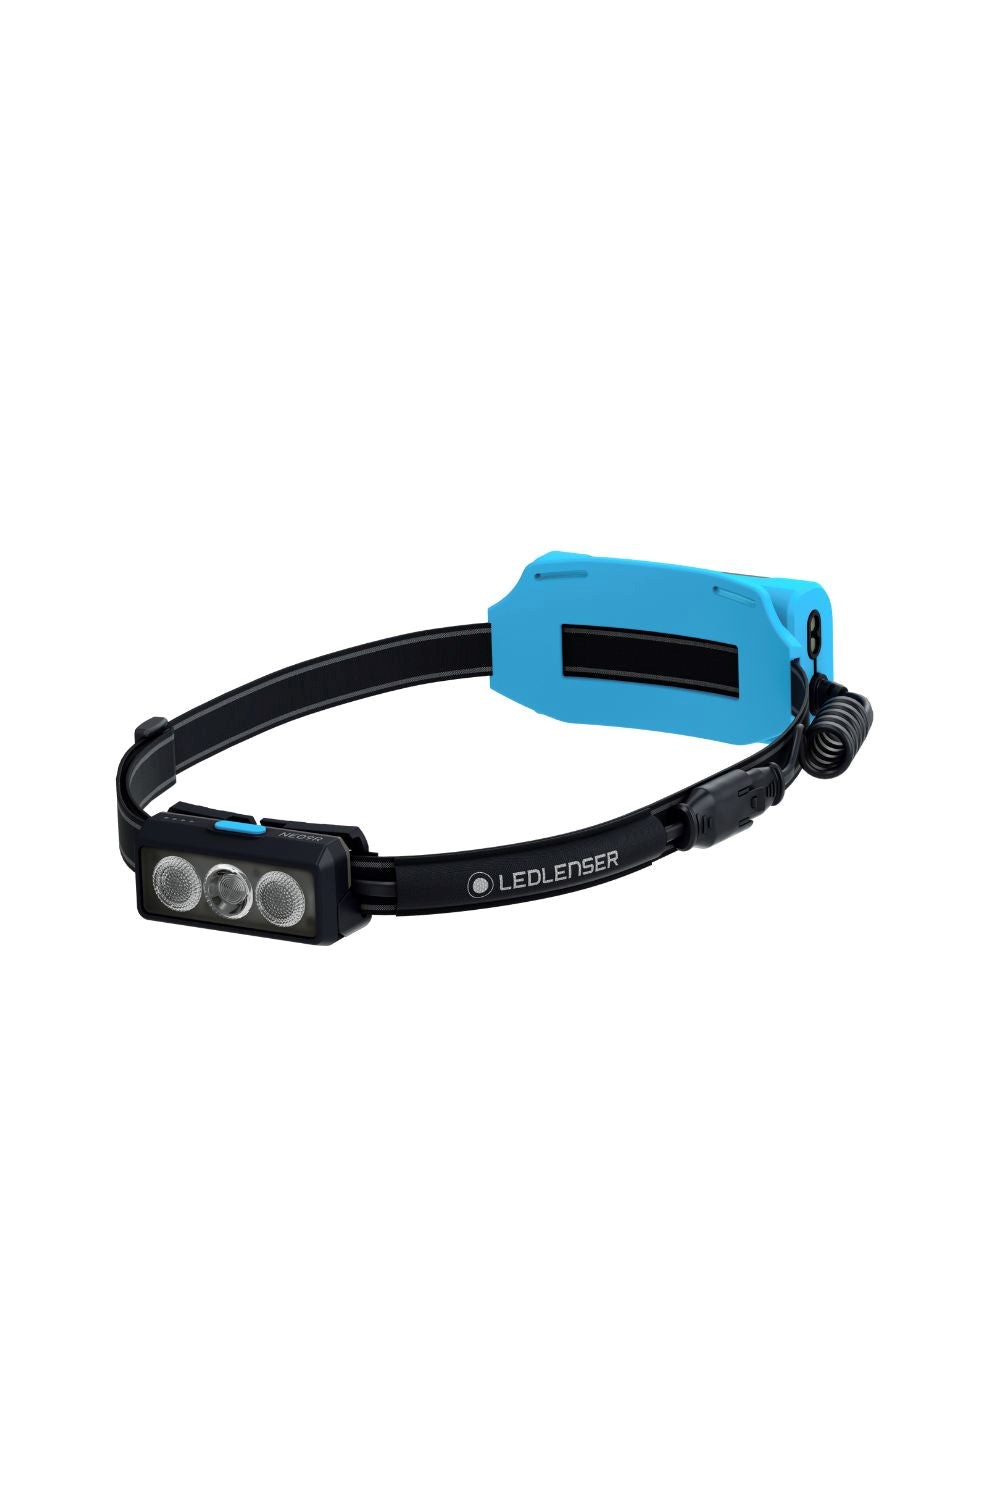 NEO9R Rechargeable Running LED Head Torch -